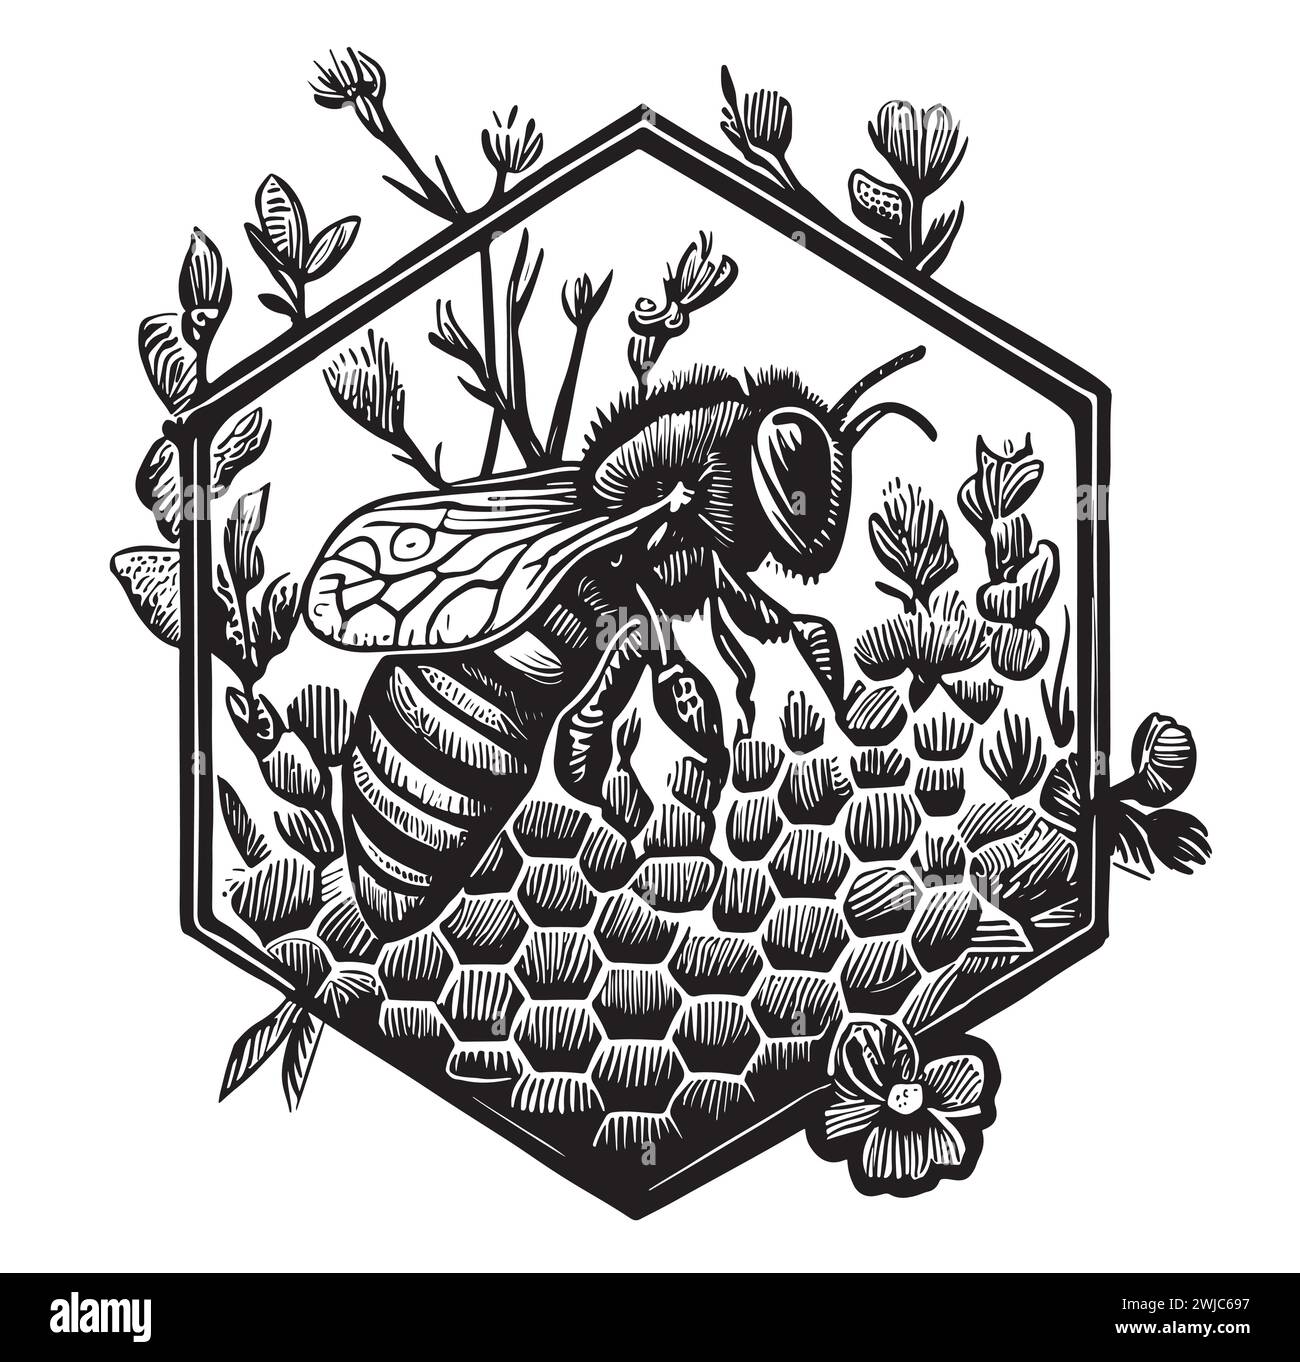 Honey bee vintage vector drawing. Hand drawn isolated insect sketch. Engraving style illustrations. Great for logo, icon, label, packaging design. Stock Vector